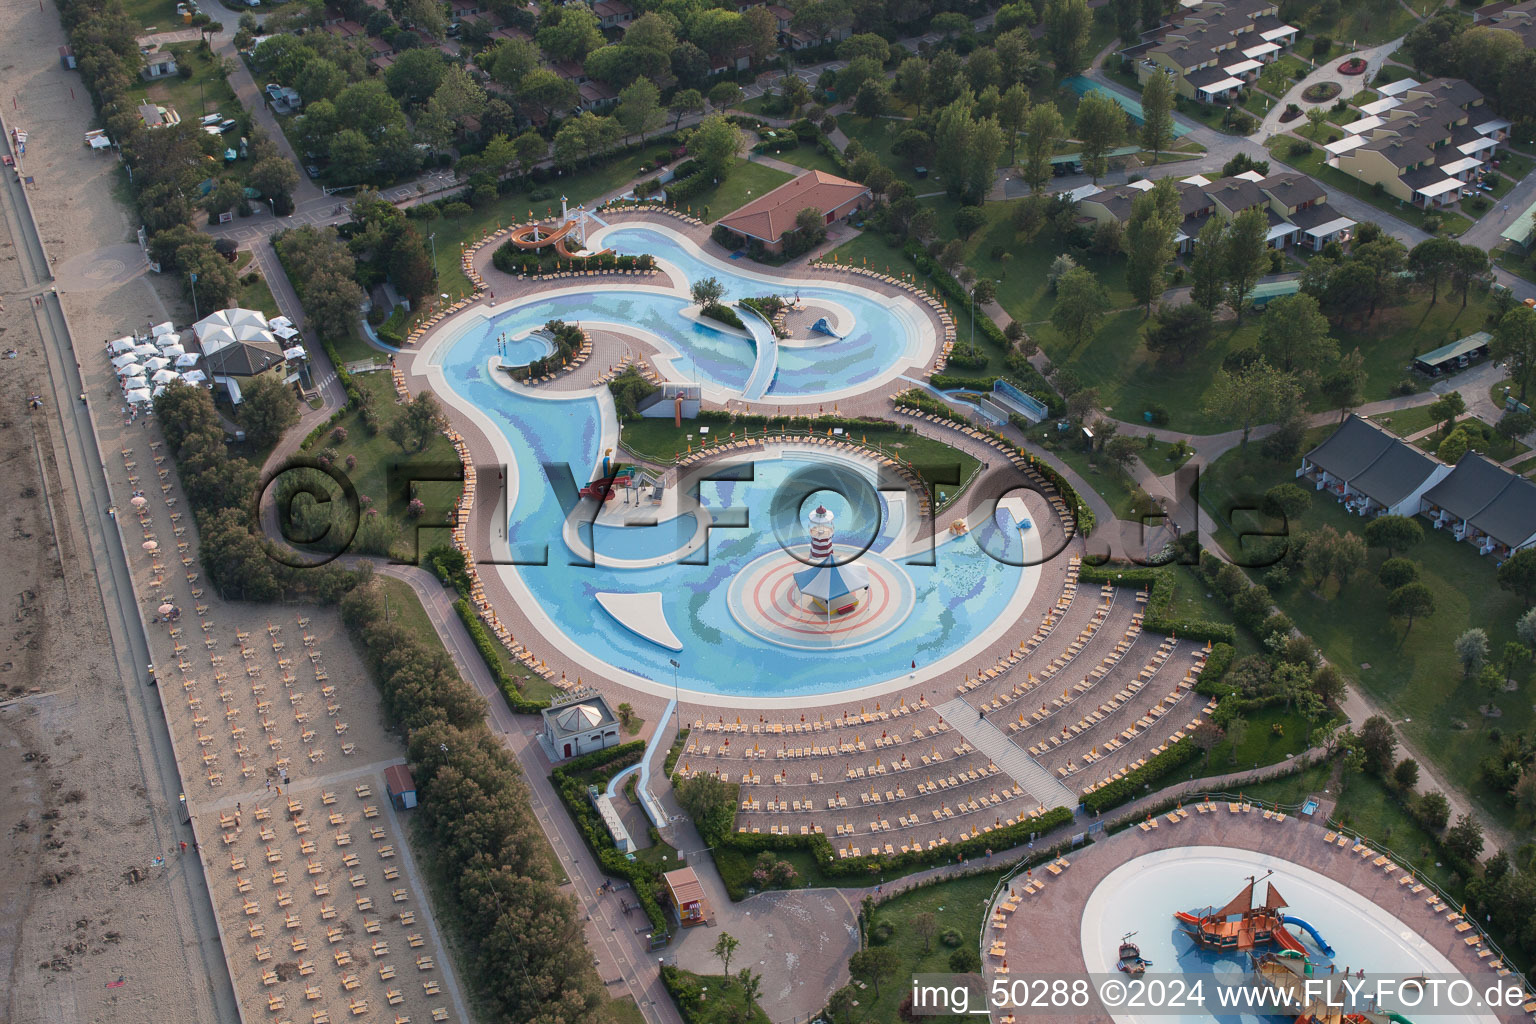 Aerial view of Swimming pool with pirate ship of the Playaloca in Duna Verde in Venetien, Italy